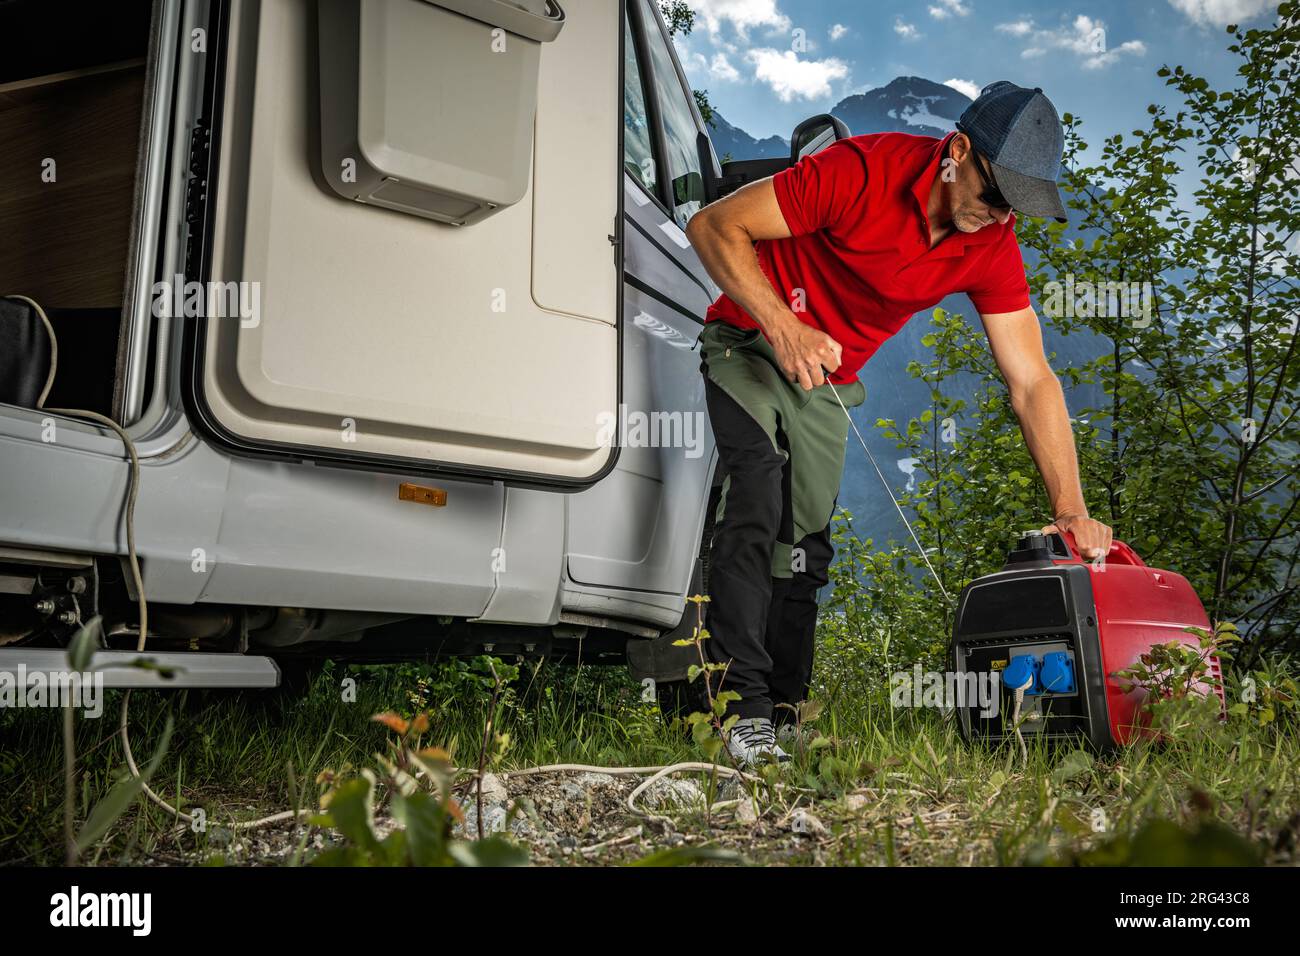 Tourist Firing Portable Inverter Generator While Dry RV Camping in Remote Wilderness Location Stock Photo